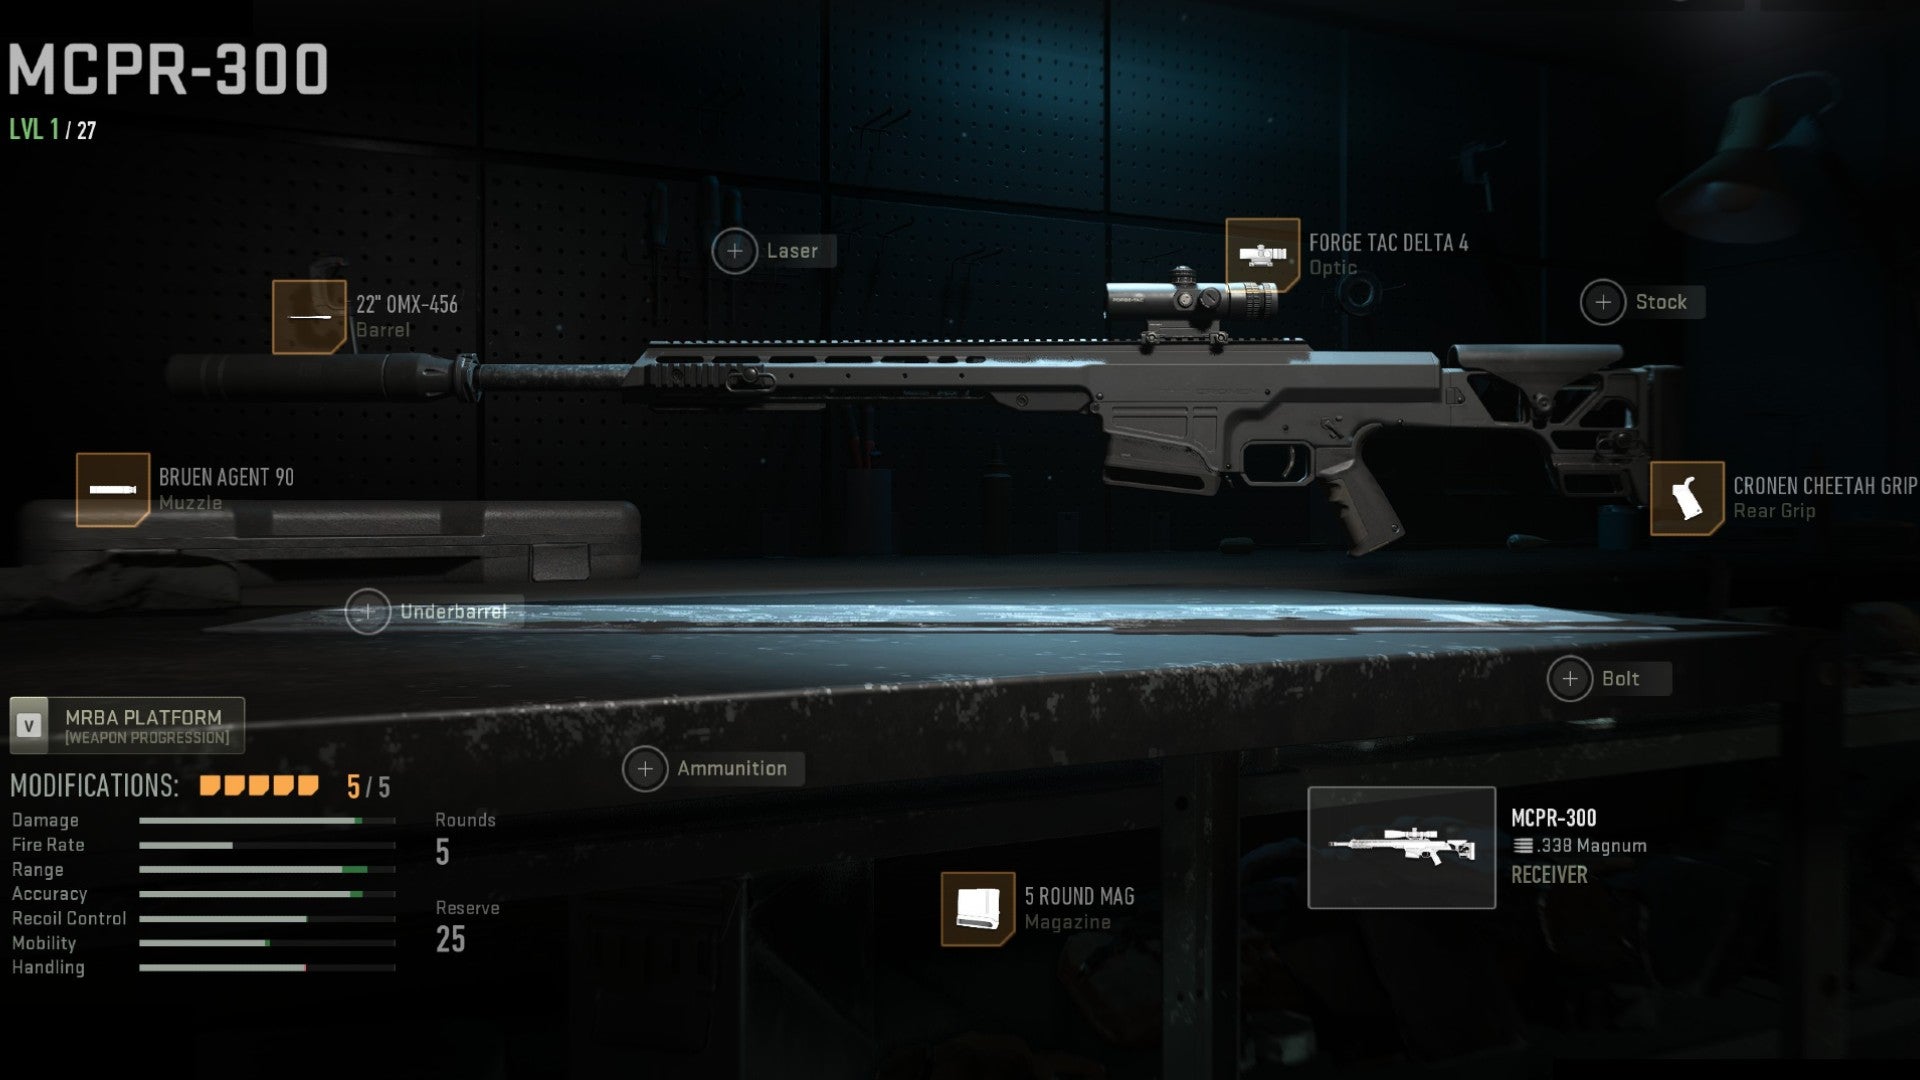 Warzone 2 screenshot showing the MCPR-300 with the Bruen Agent 90, 22" OMX-456, Forge Tac Delta 4, 5 Round Mag, and Cronen Cheetah Grip attached.